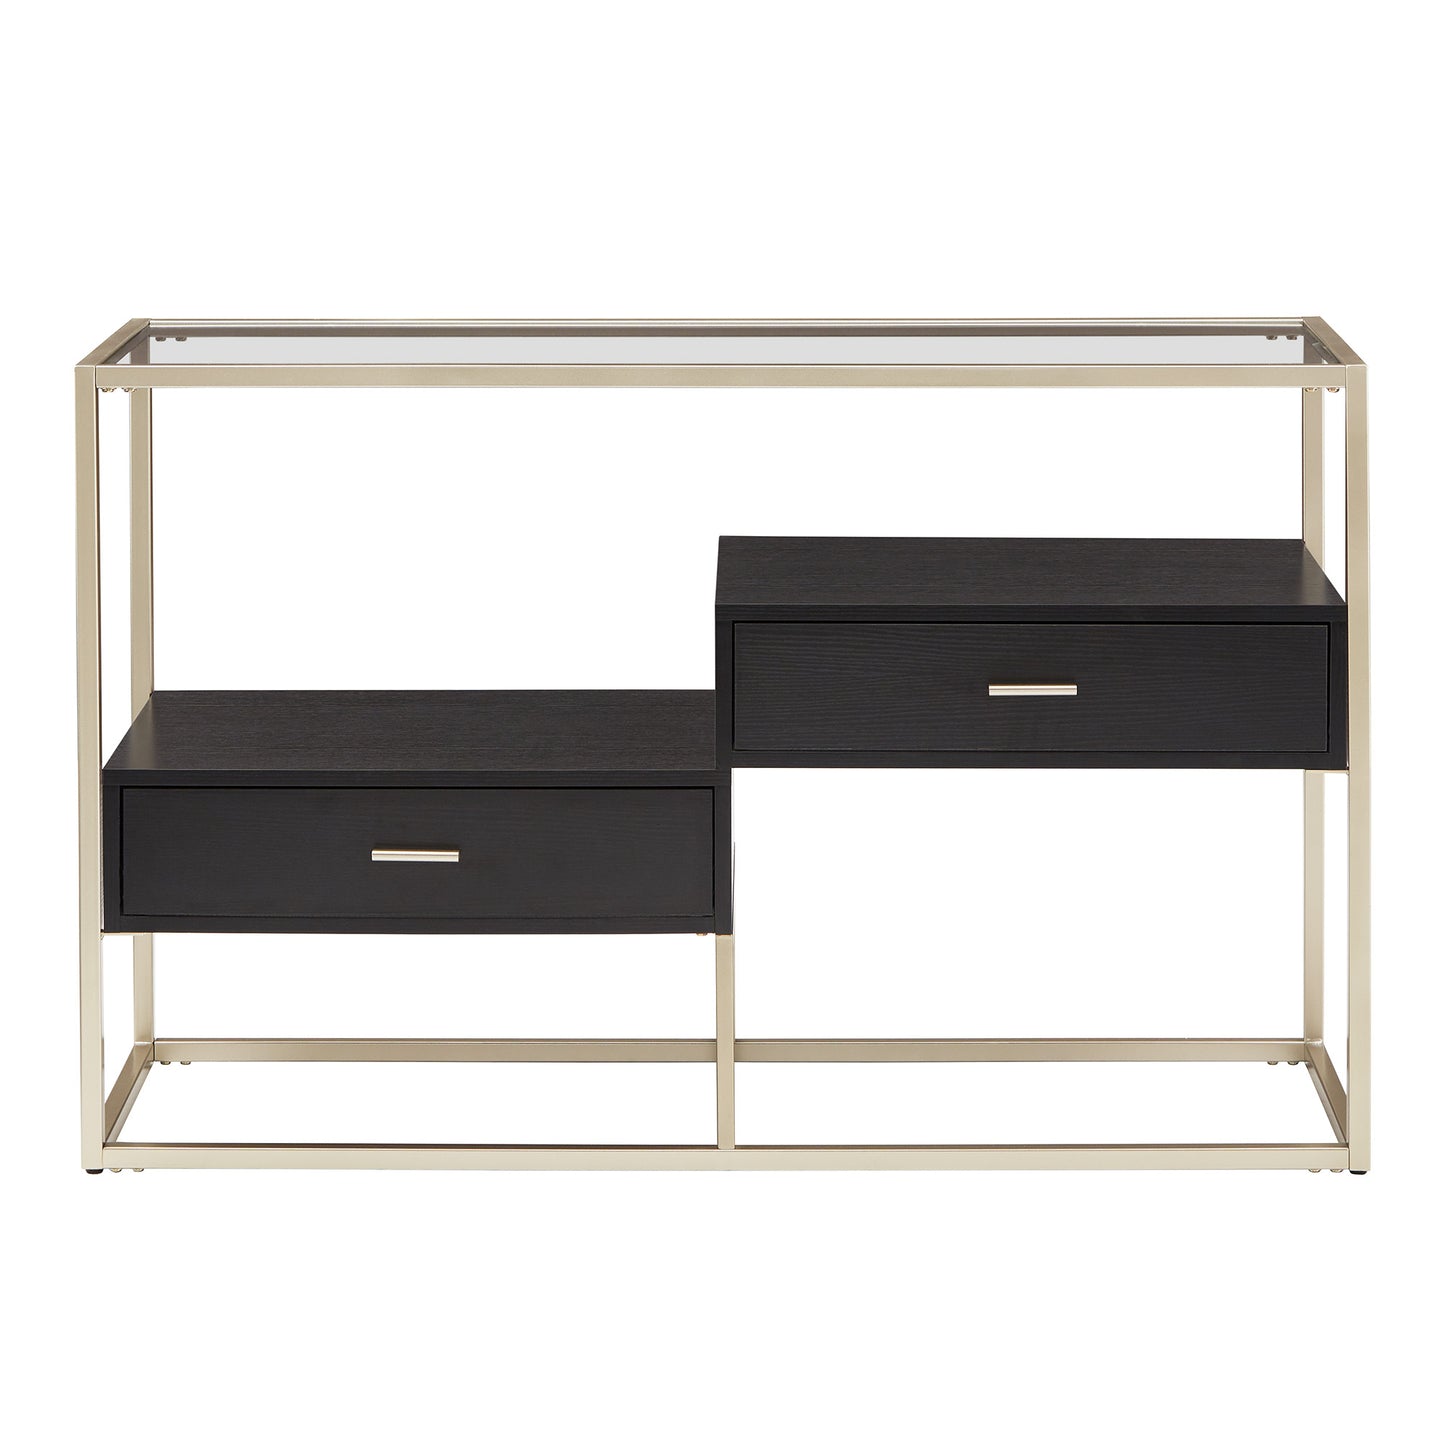 Champagne Silver Finish Table with Storage - Sofa Table